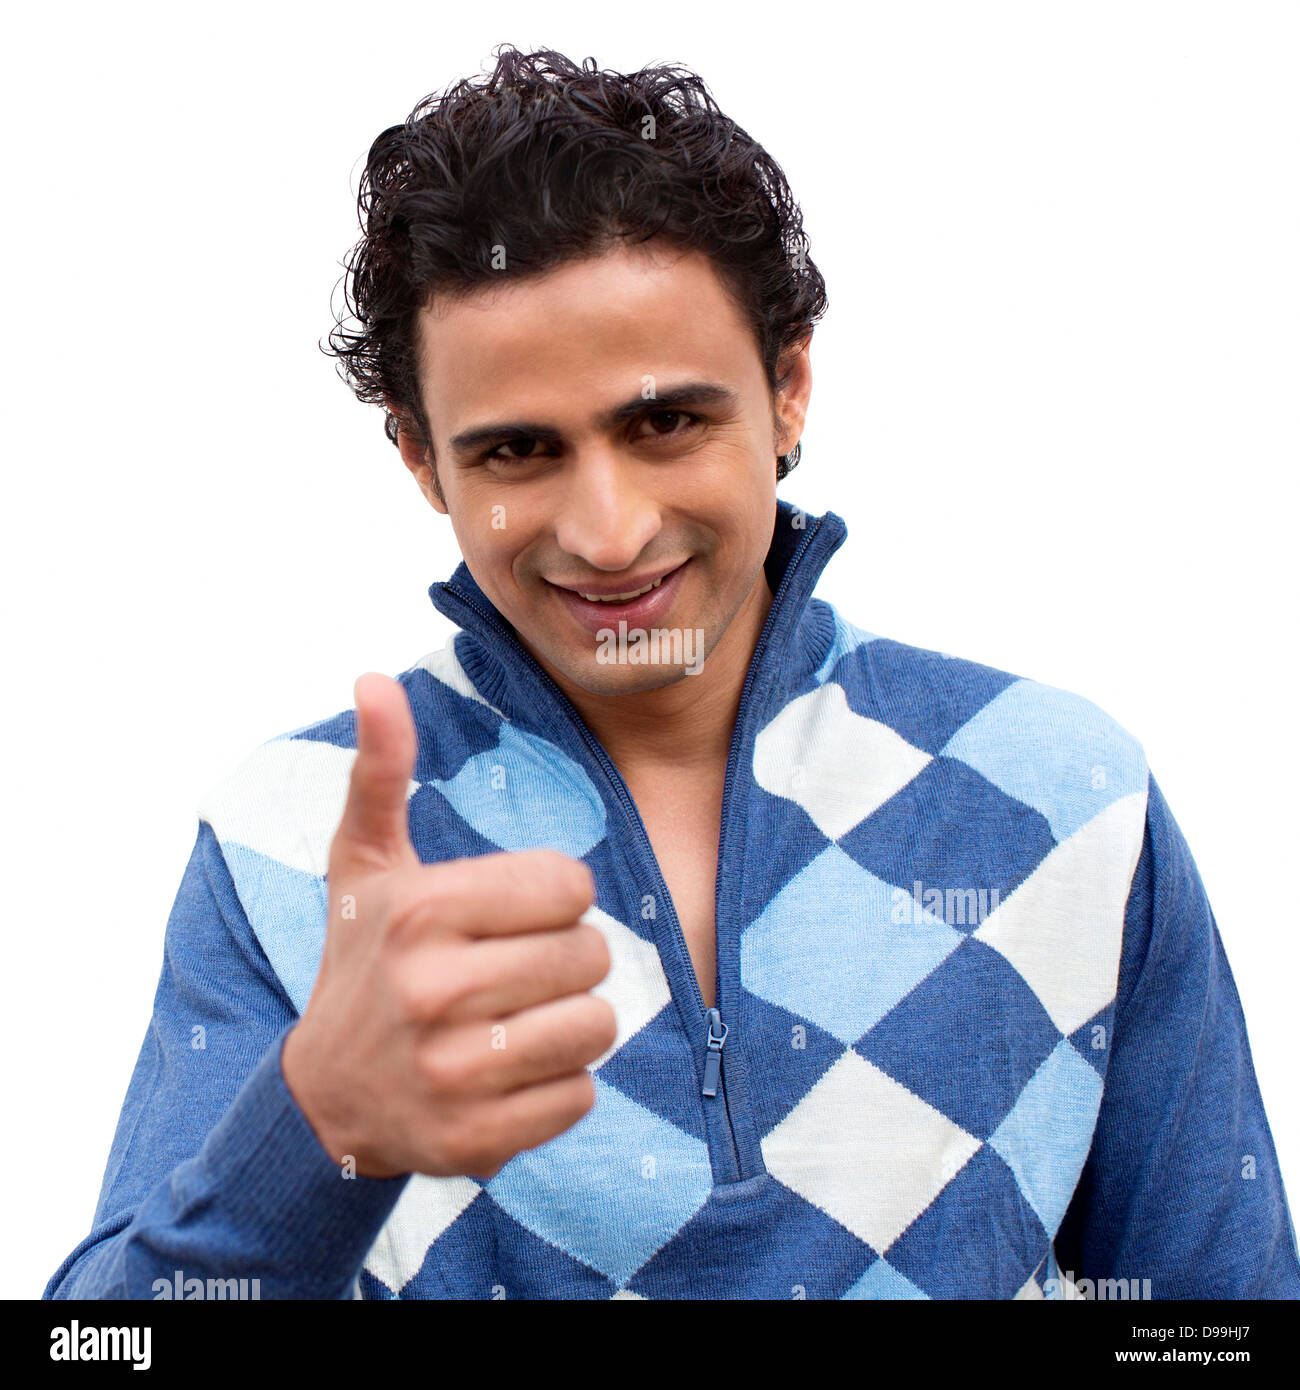 Portrait of a smiling man showing thumbs up sign Stock Photo